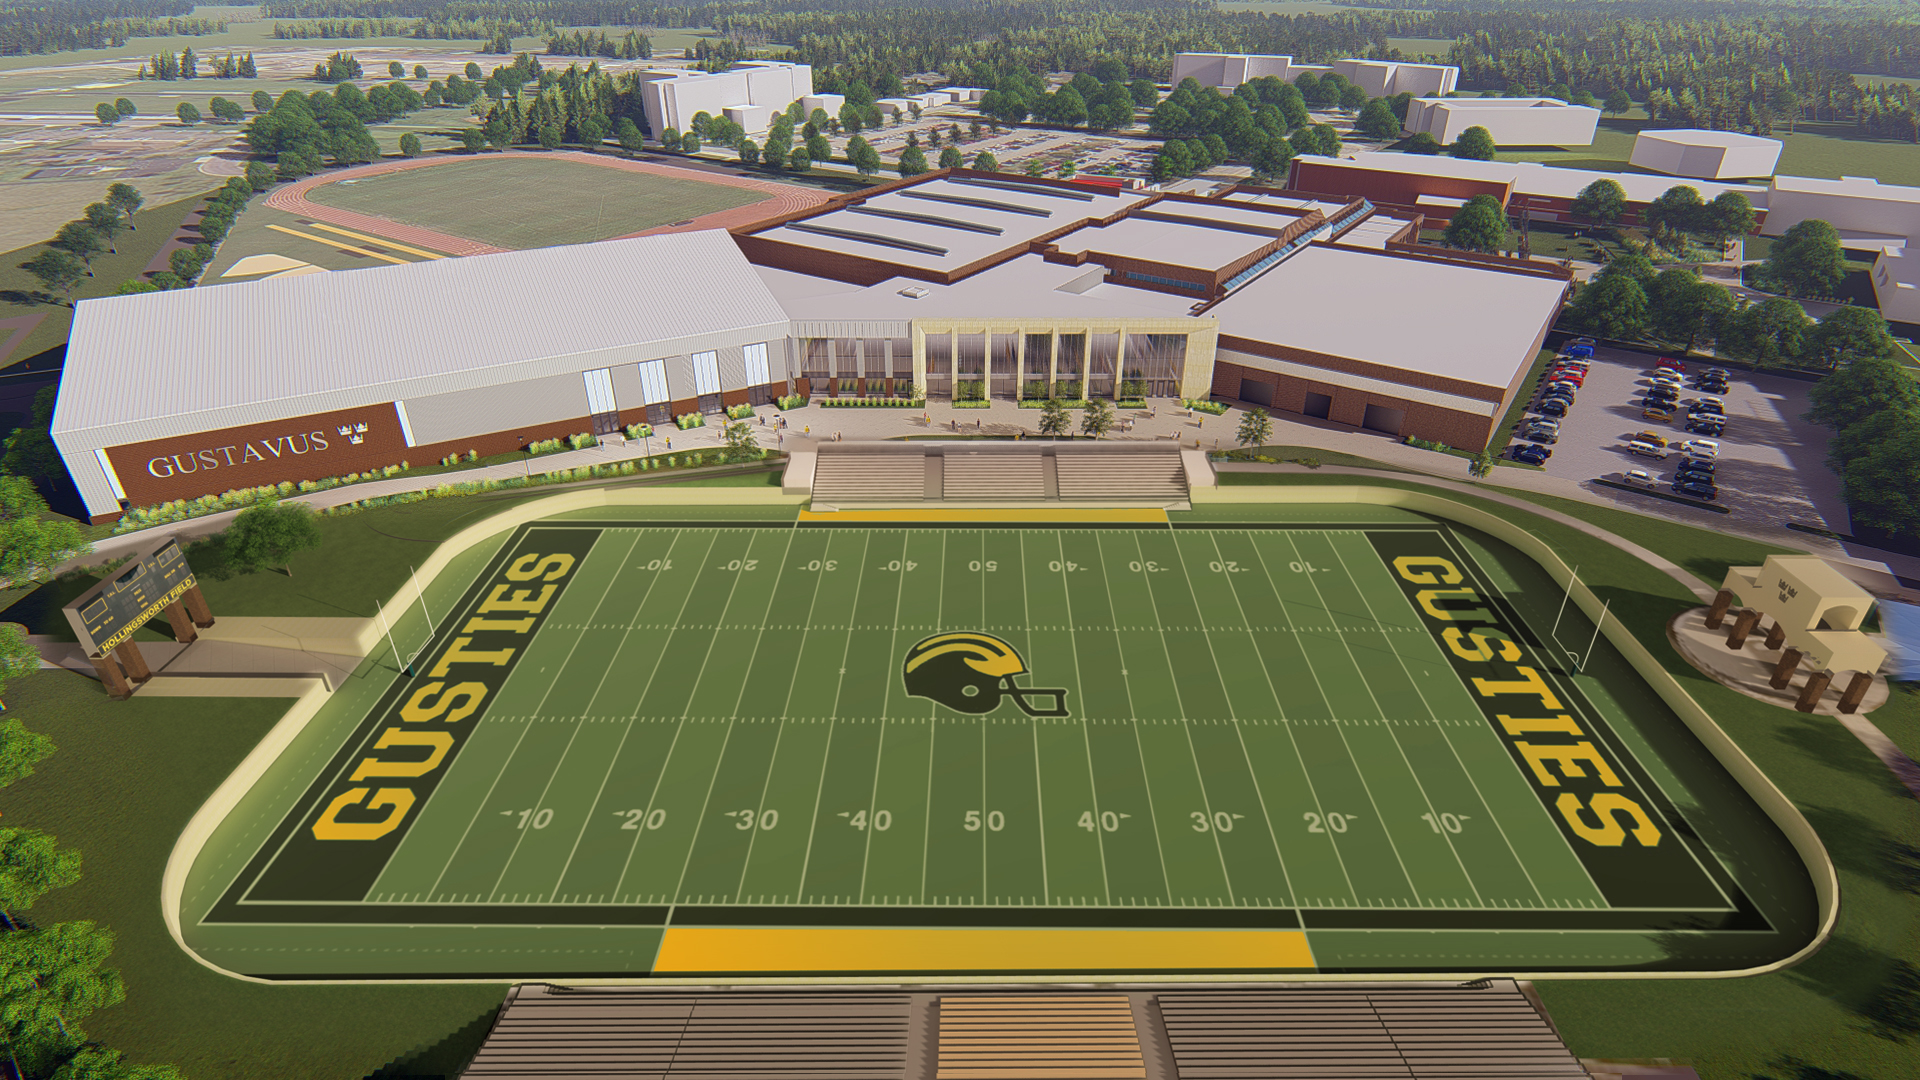 Lund Center Project to Break Ground This Spring - The expansion and  renovation of Gustavus Adolphus College's wellness and athletic facility  begins in April 2021.Posted on February 19th, 2021 by JJ Akin '11